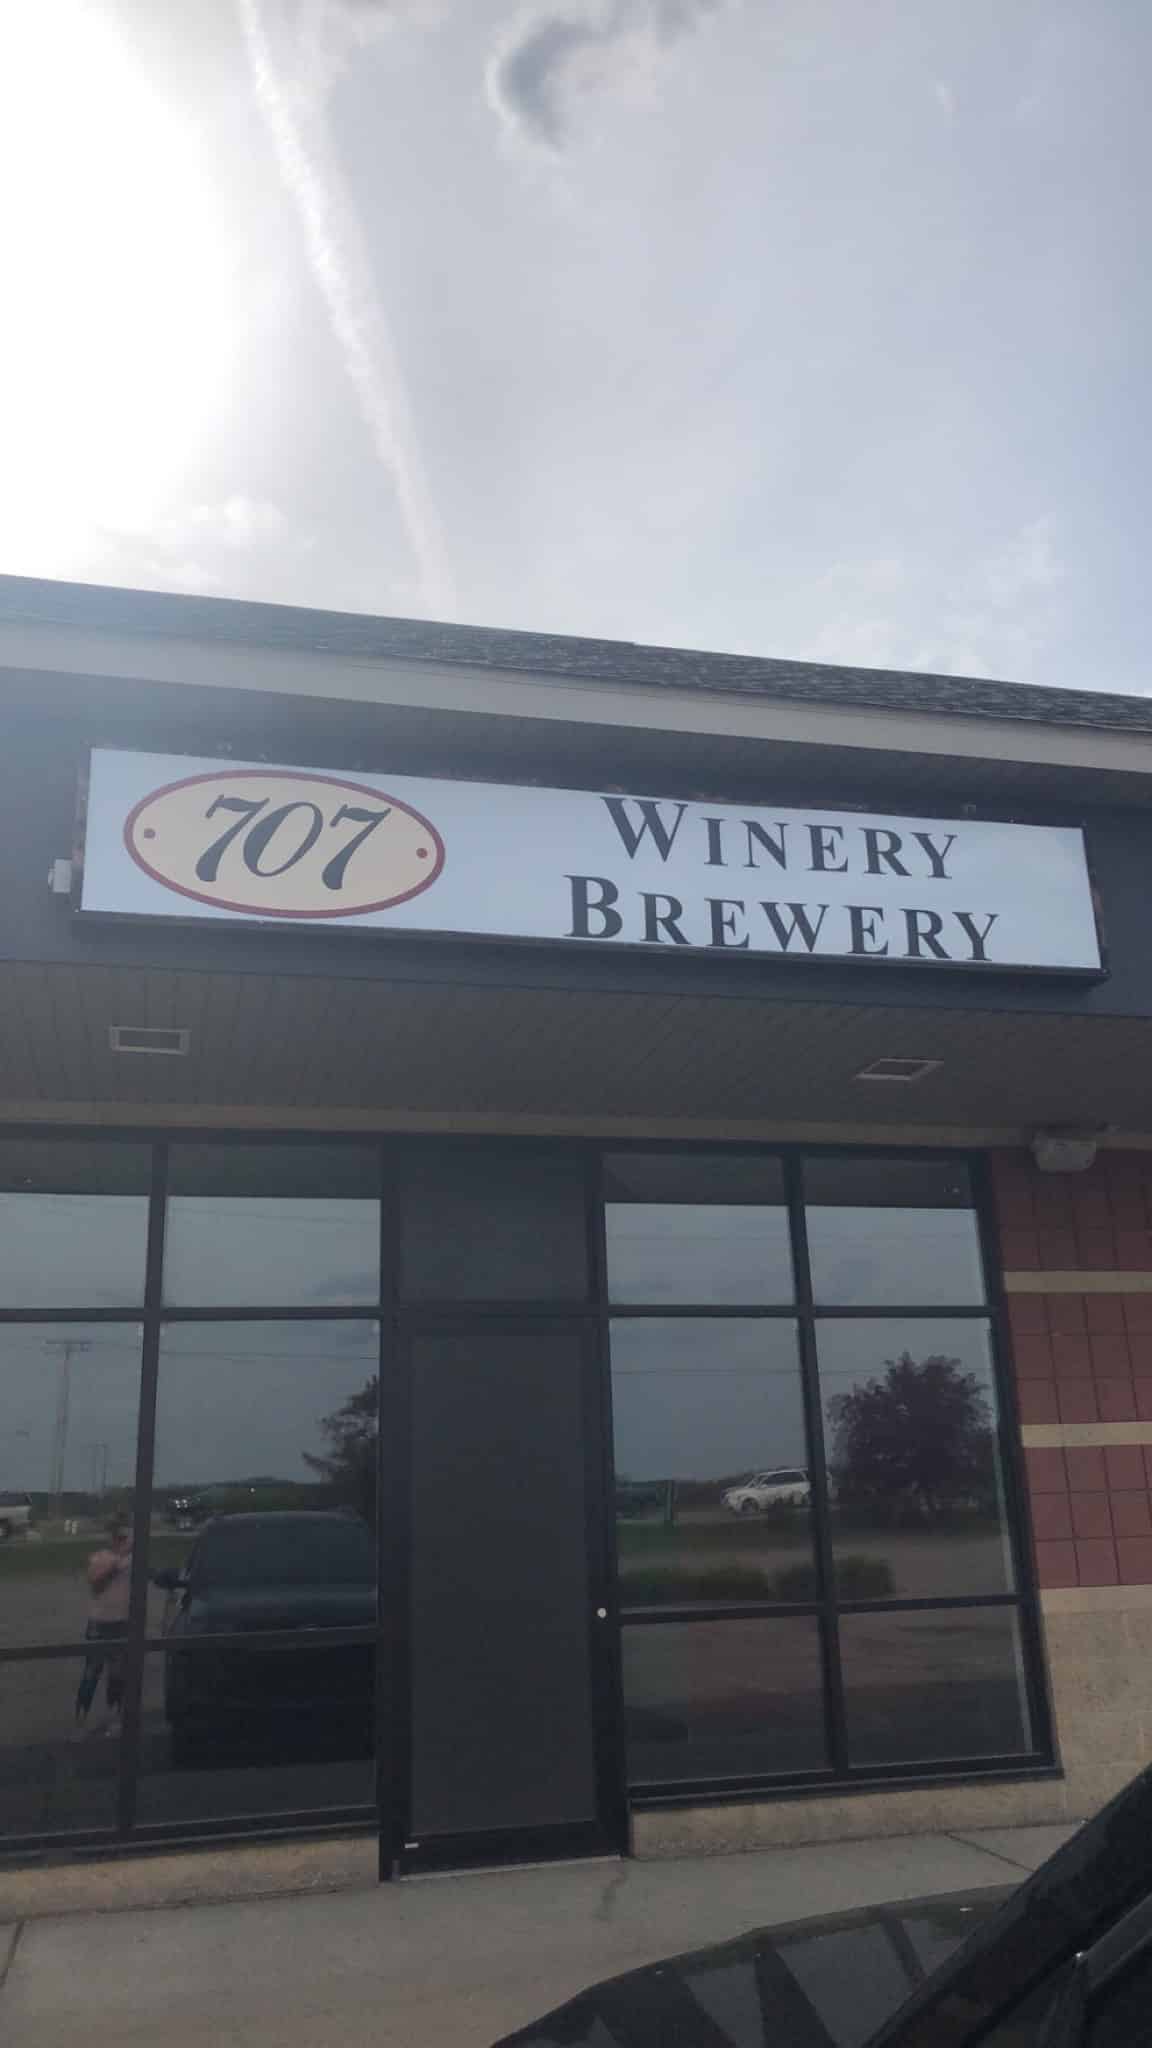 707 Winery and Brewery